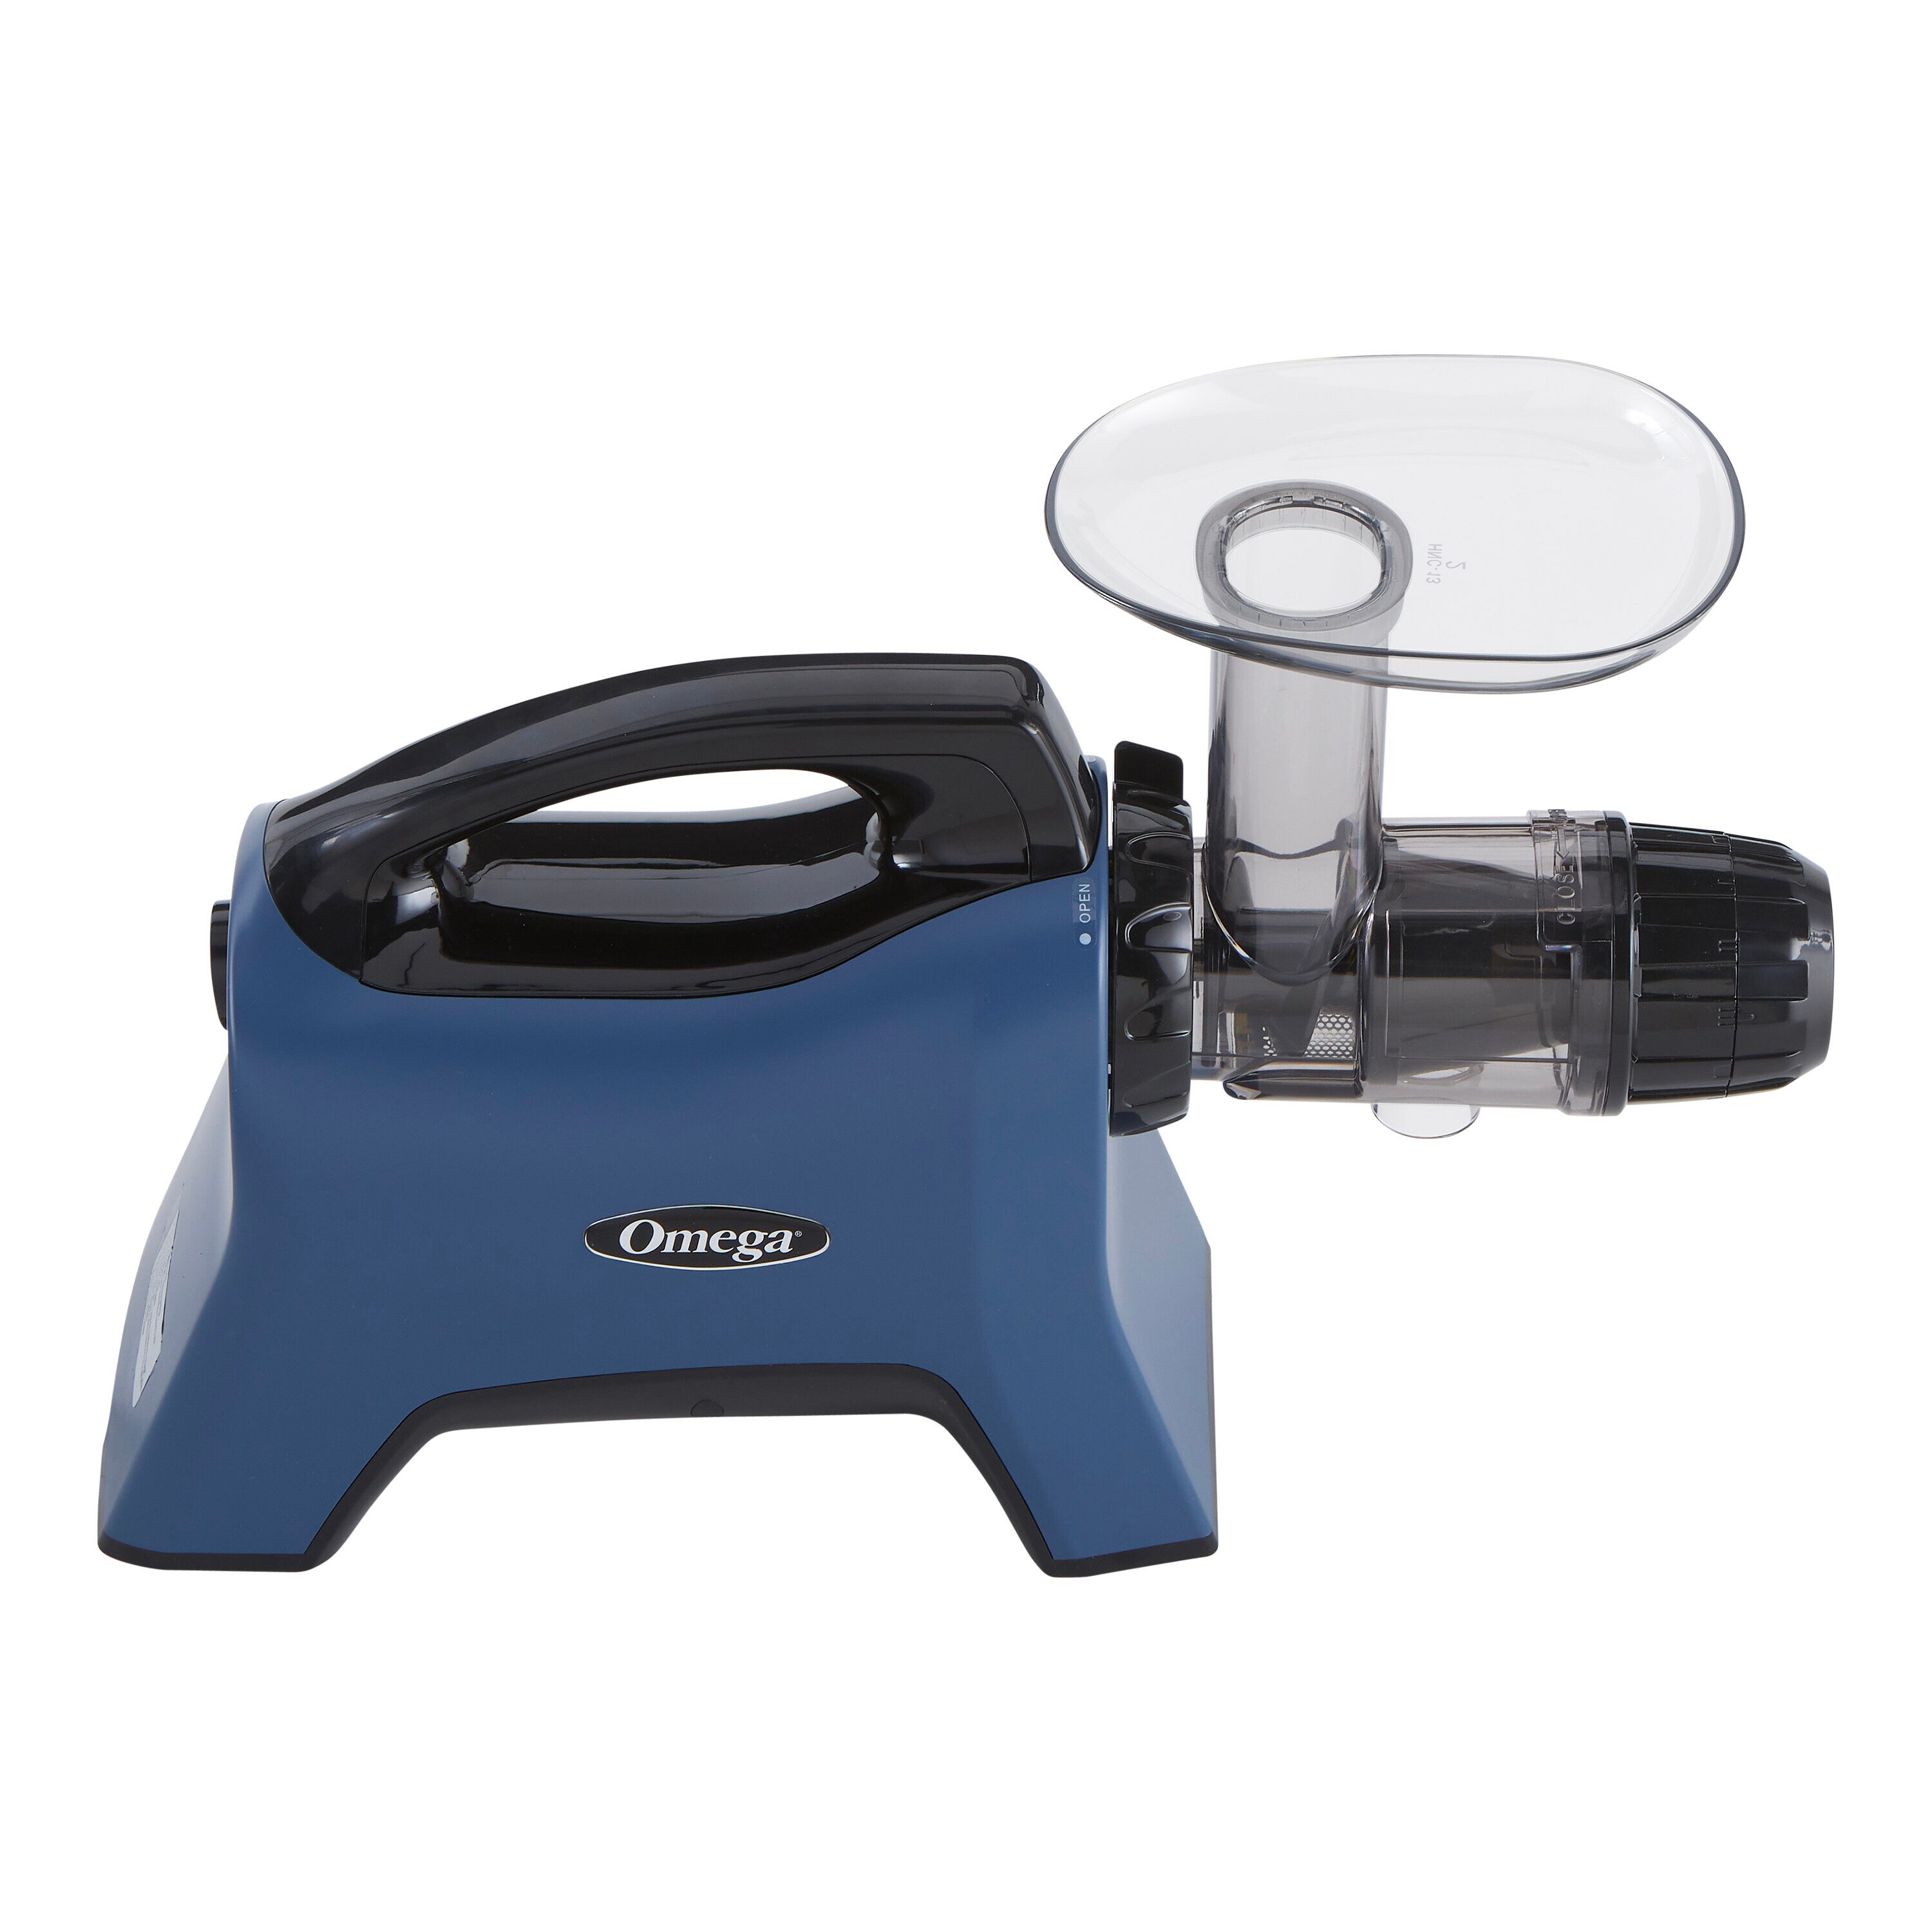 SmartKitchen Portable electric automatic juicer